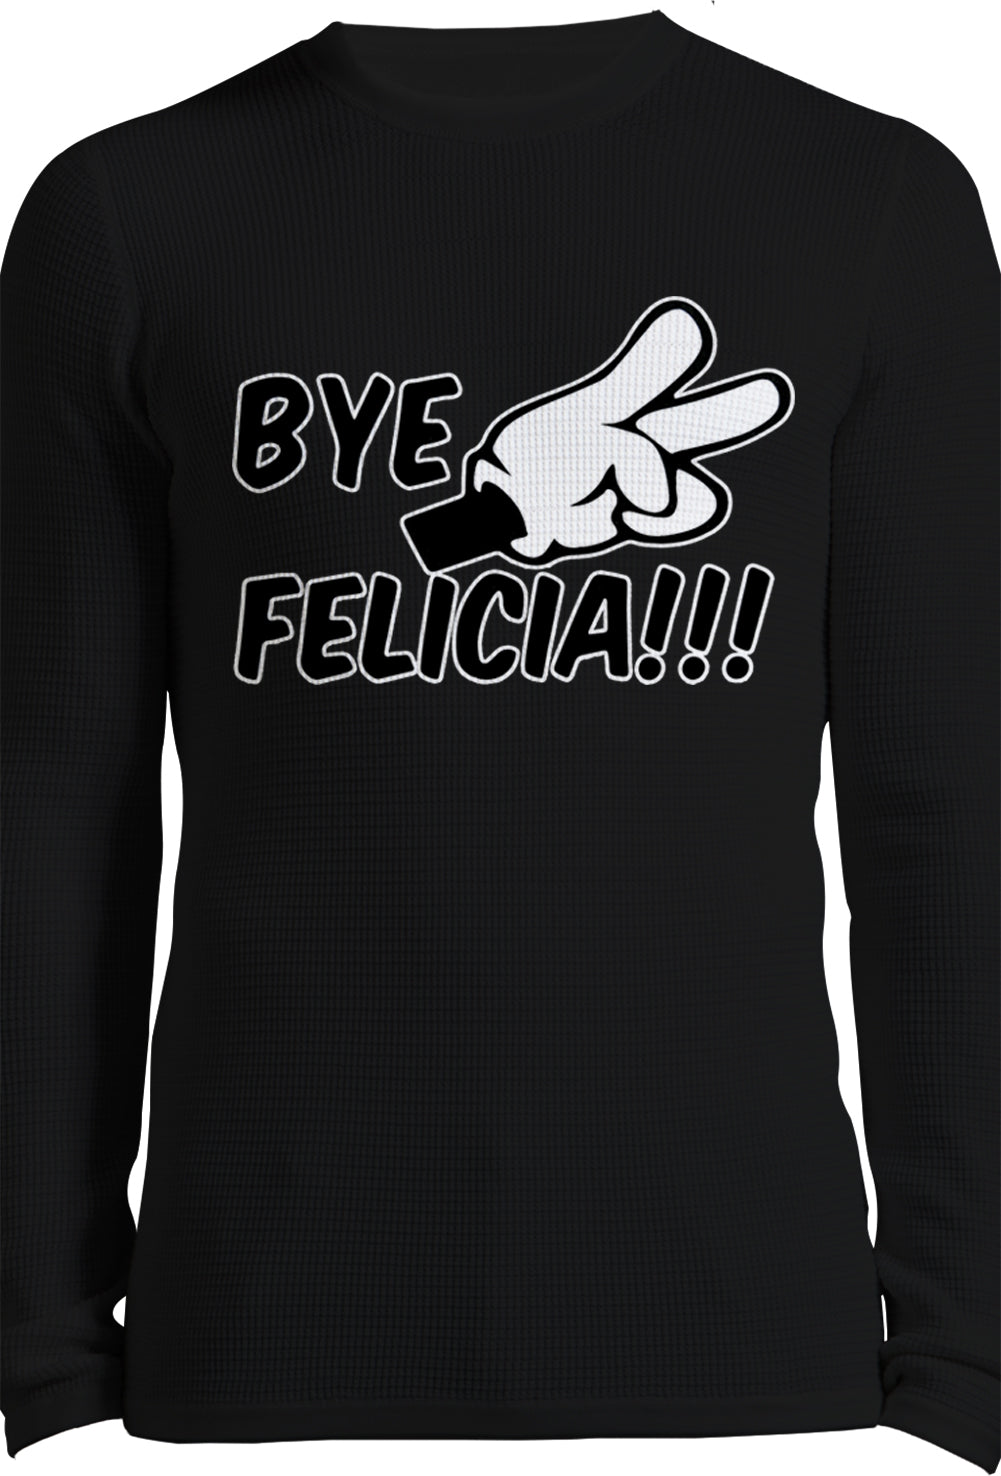 Bye Felicia Quote from Friday Thermal Long Sleeve Shirt Front Side